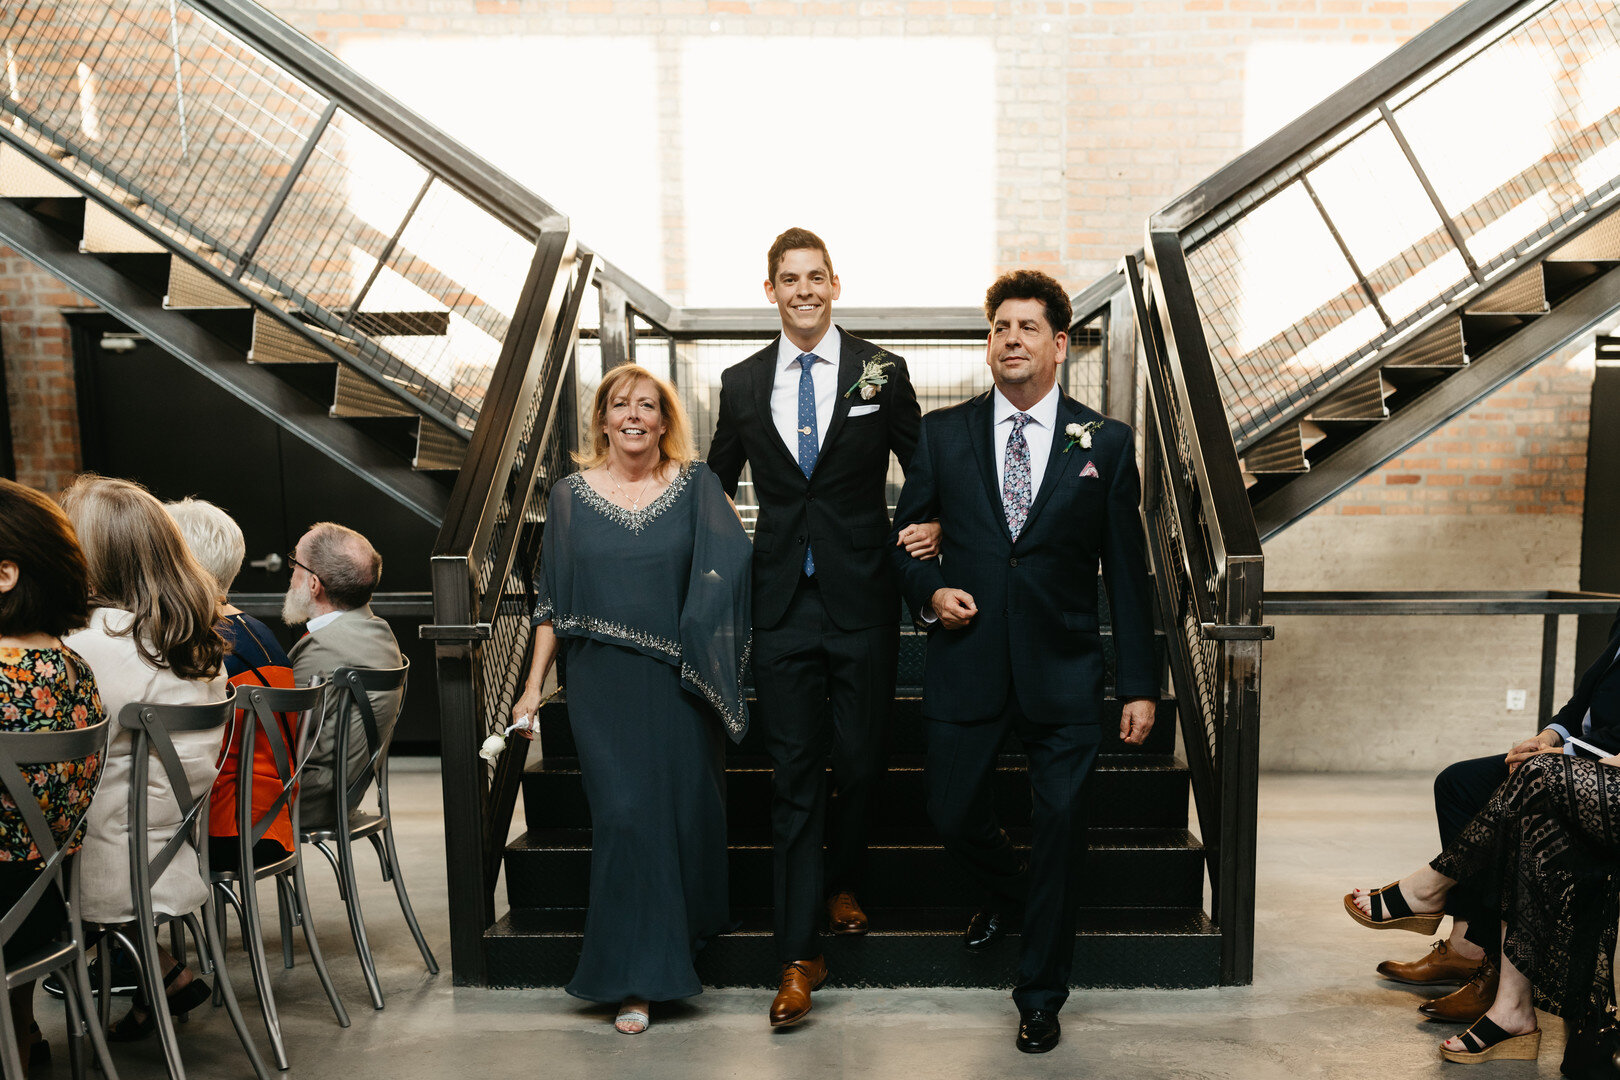 Fairlie Industrial Chicago Wedding captured by We Are The Bowsers. See more wedding inspiration at CHItheeWED.com!